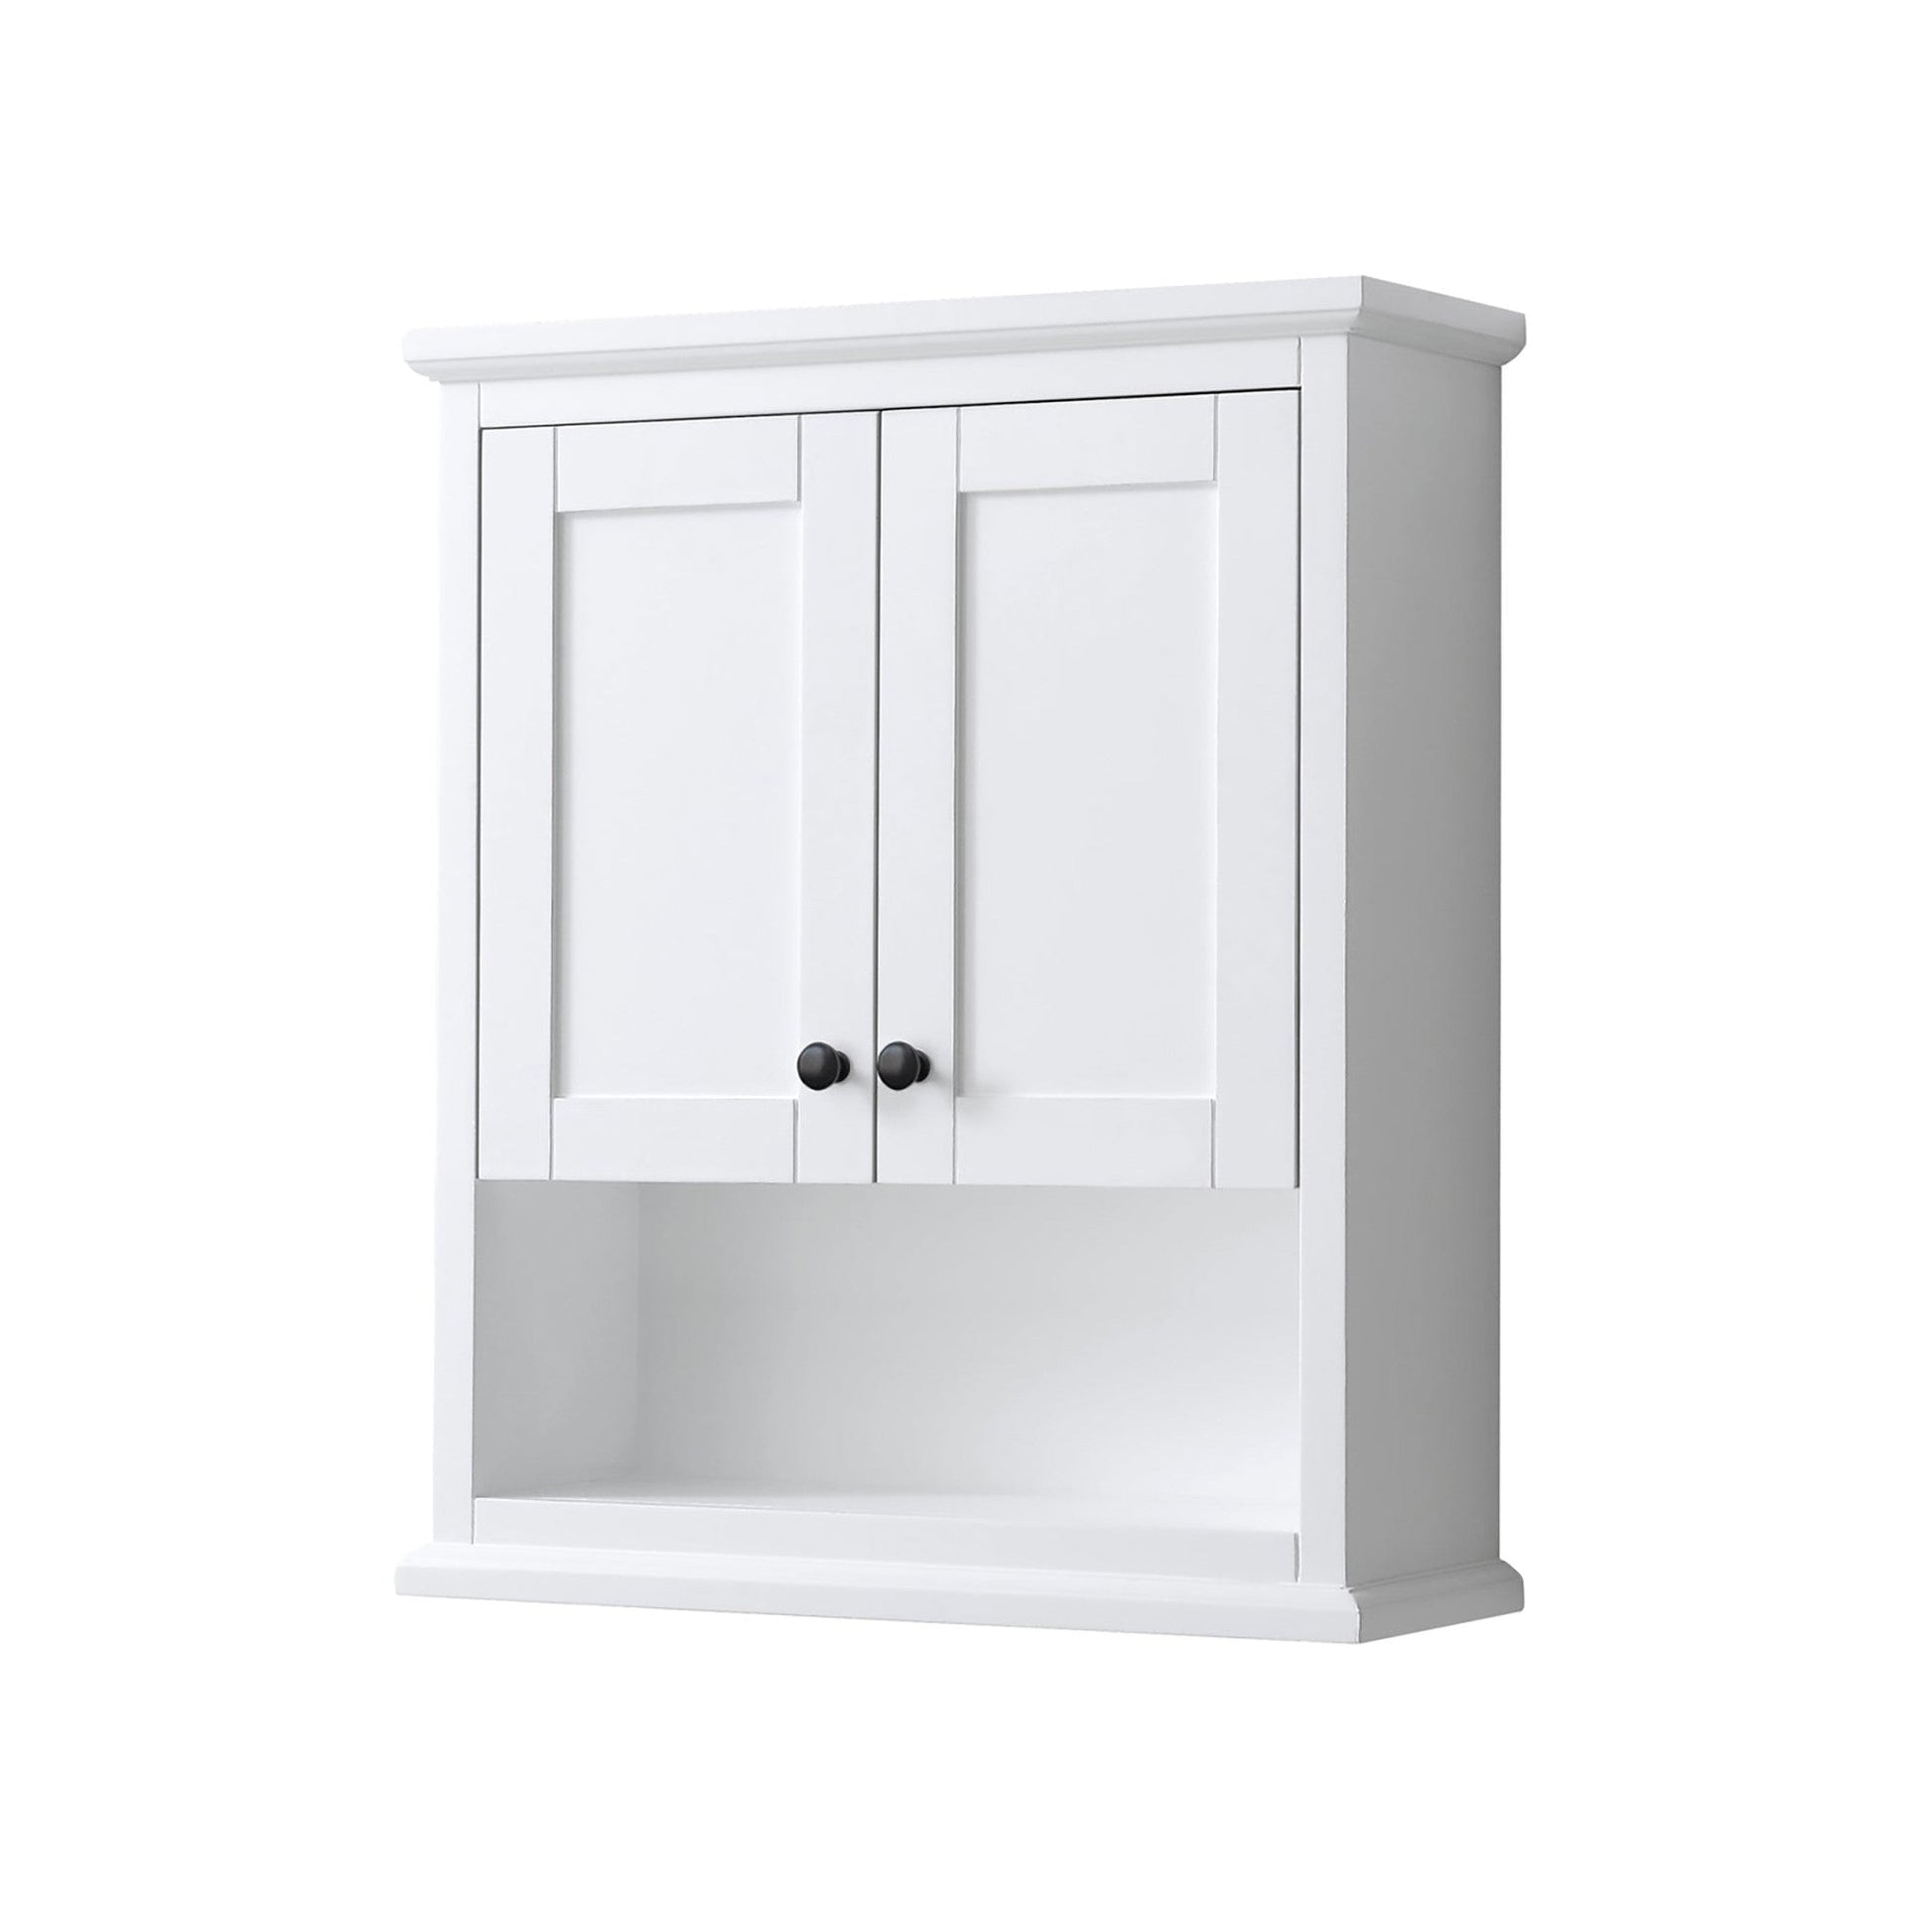 Avery 25" Over-the-Toilet Bathroom Wall-Mounted Storage Cabinet in White With Matte Black Trim